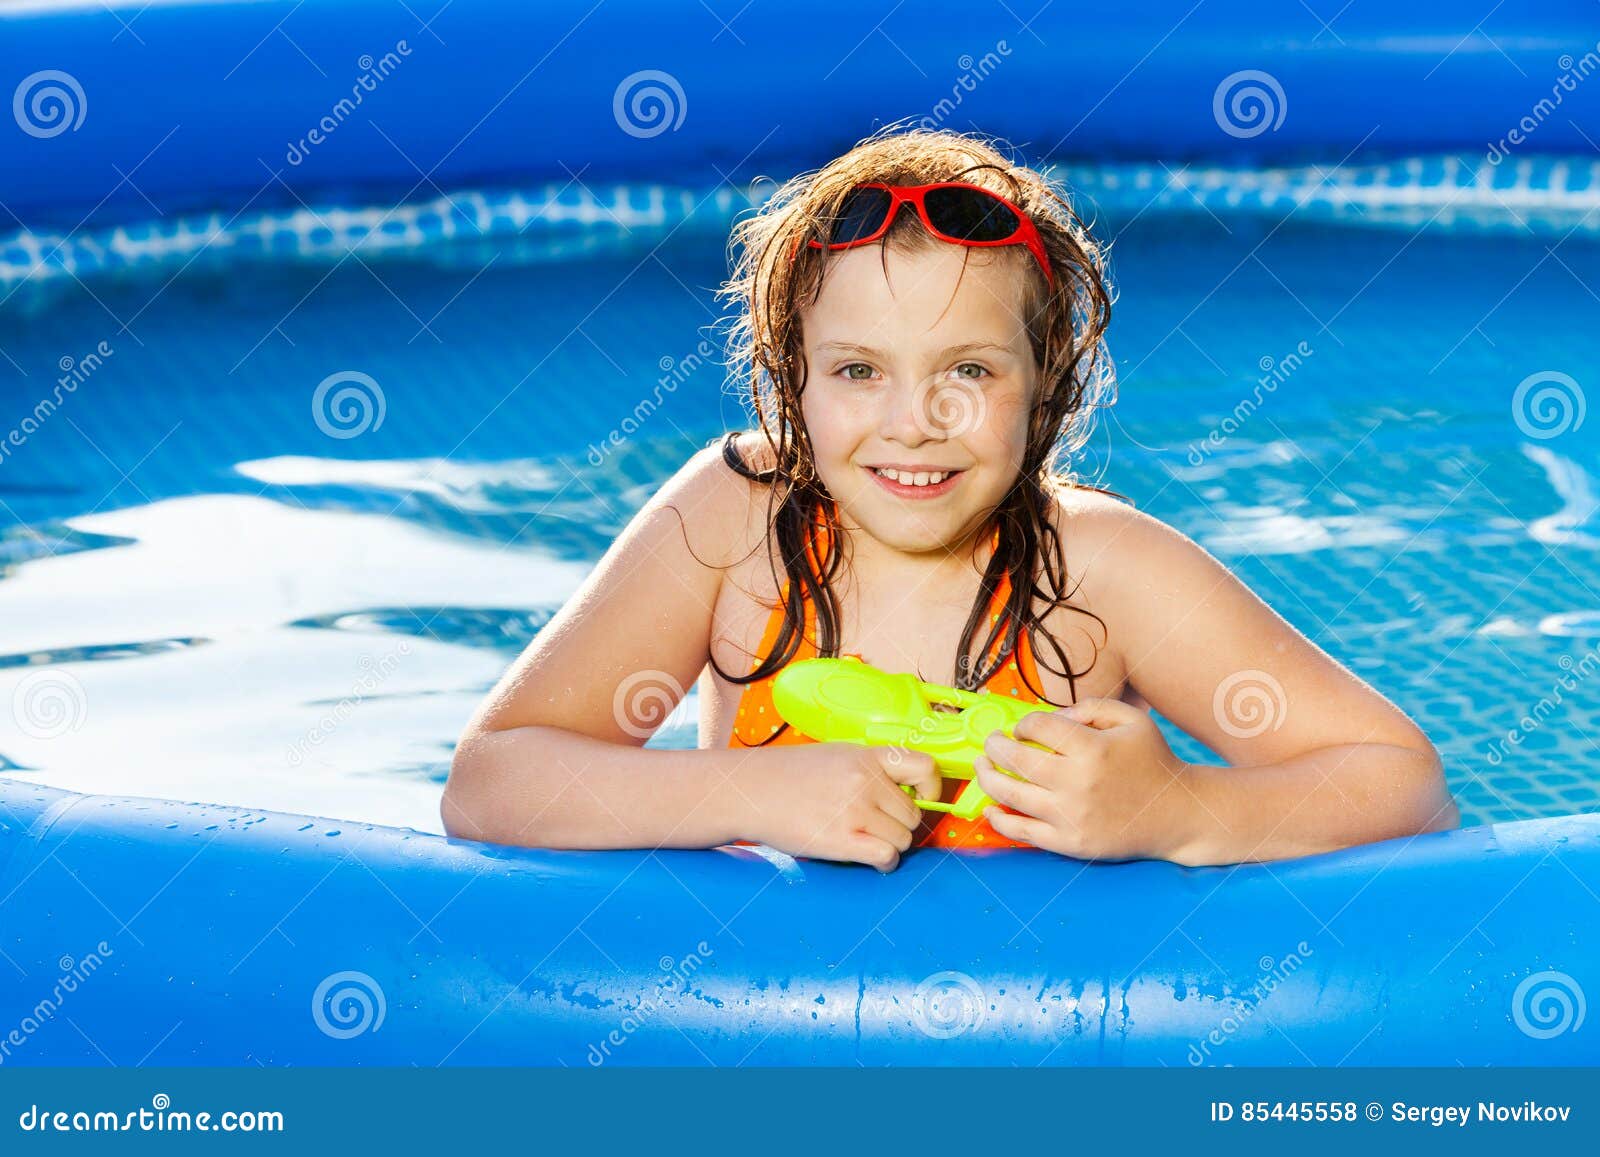 happy girl playing with water gun in the pool